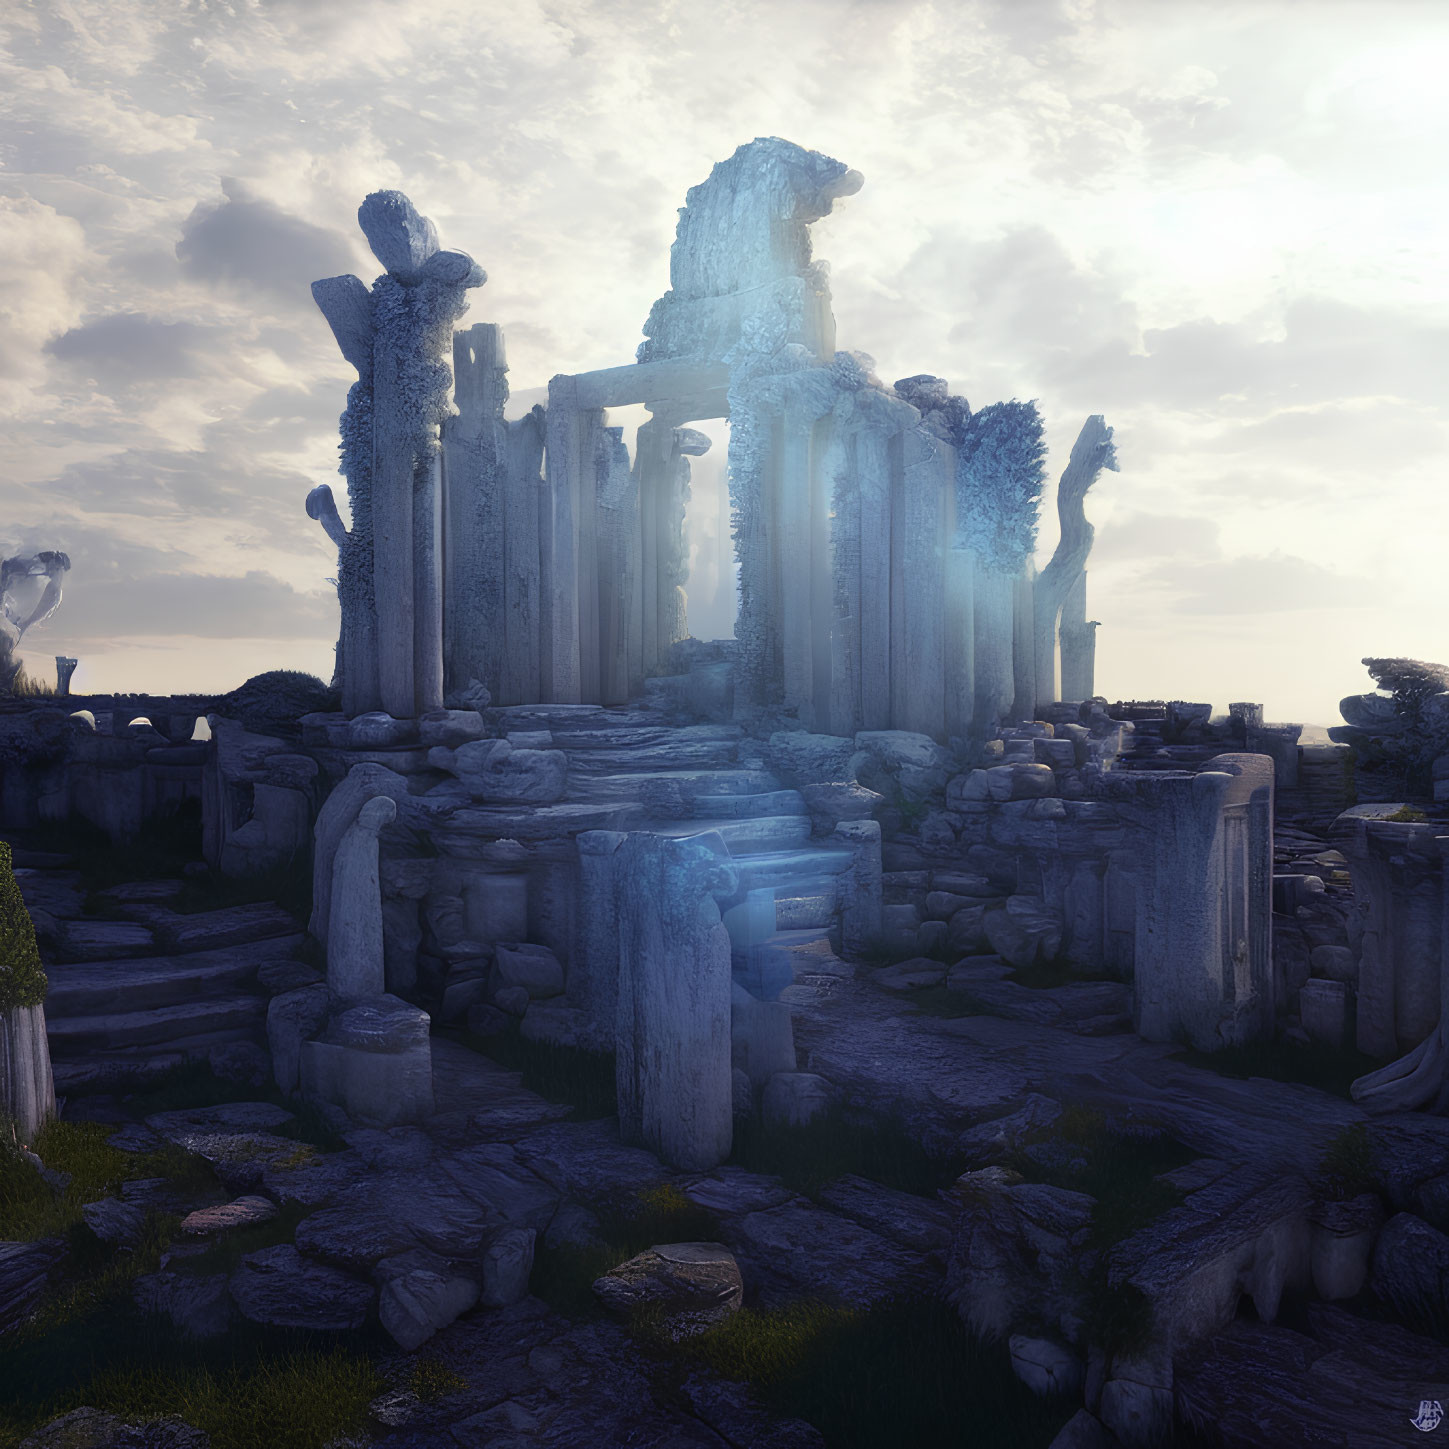 Ancient Pillars and Archways in Rocky Landscape with Ethereal Blue Light